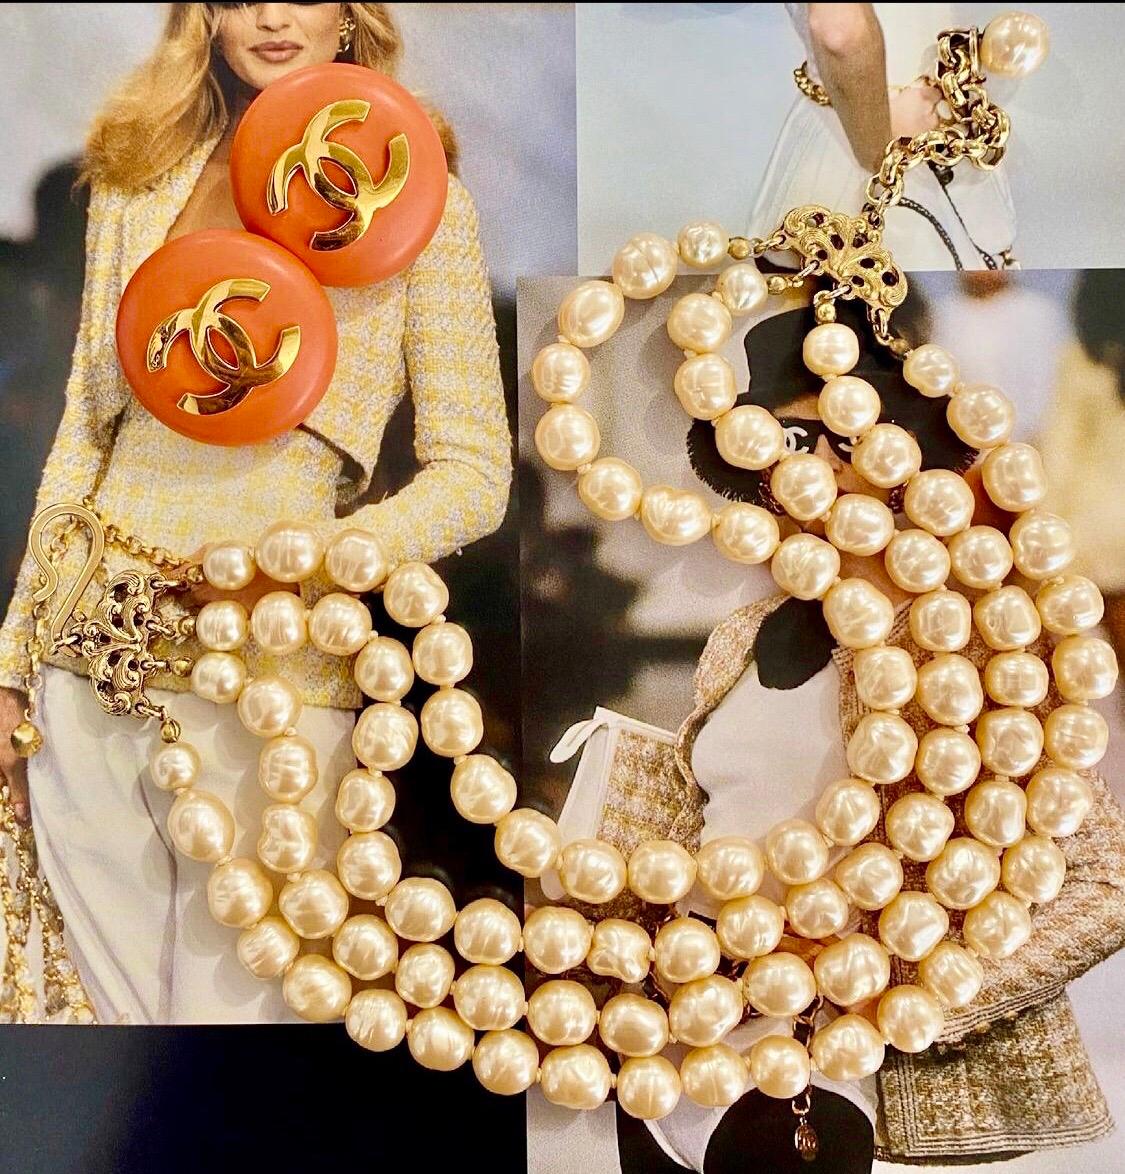 Add some color to your look with these adorable Chanel earrings! Designed by Victoire de Castellane from 1986 to 1989, these circular orange earrings from Chanel's 24th collection feature a gold CC with clip-on closures. Stamped Chanel 24 Made in